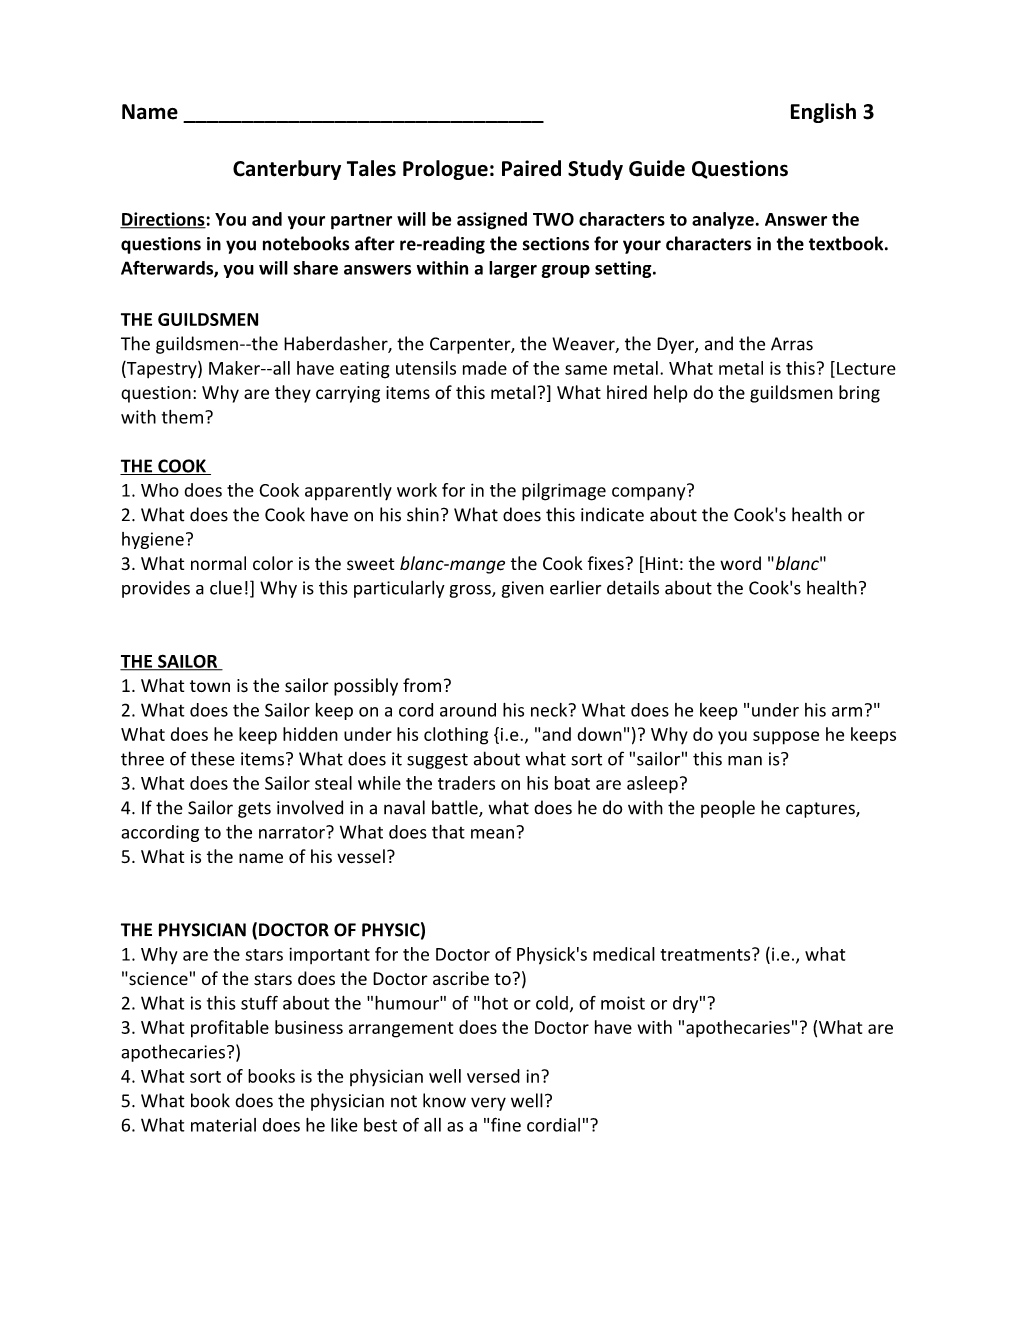 Canterbury Tales Prologue: Paired Study Guide Questions